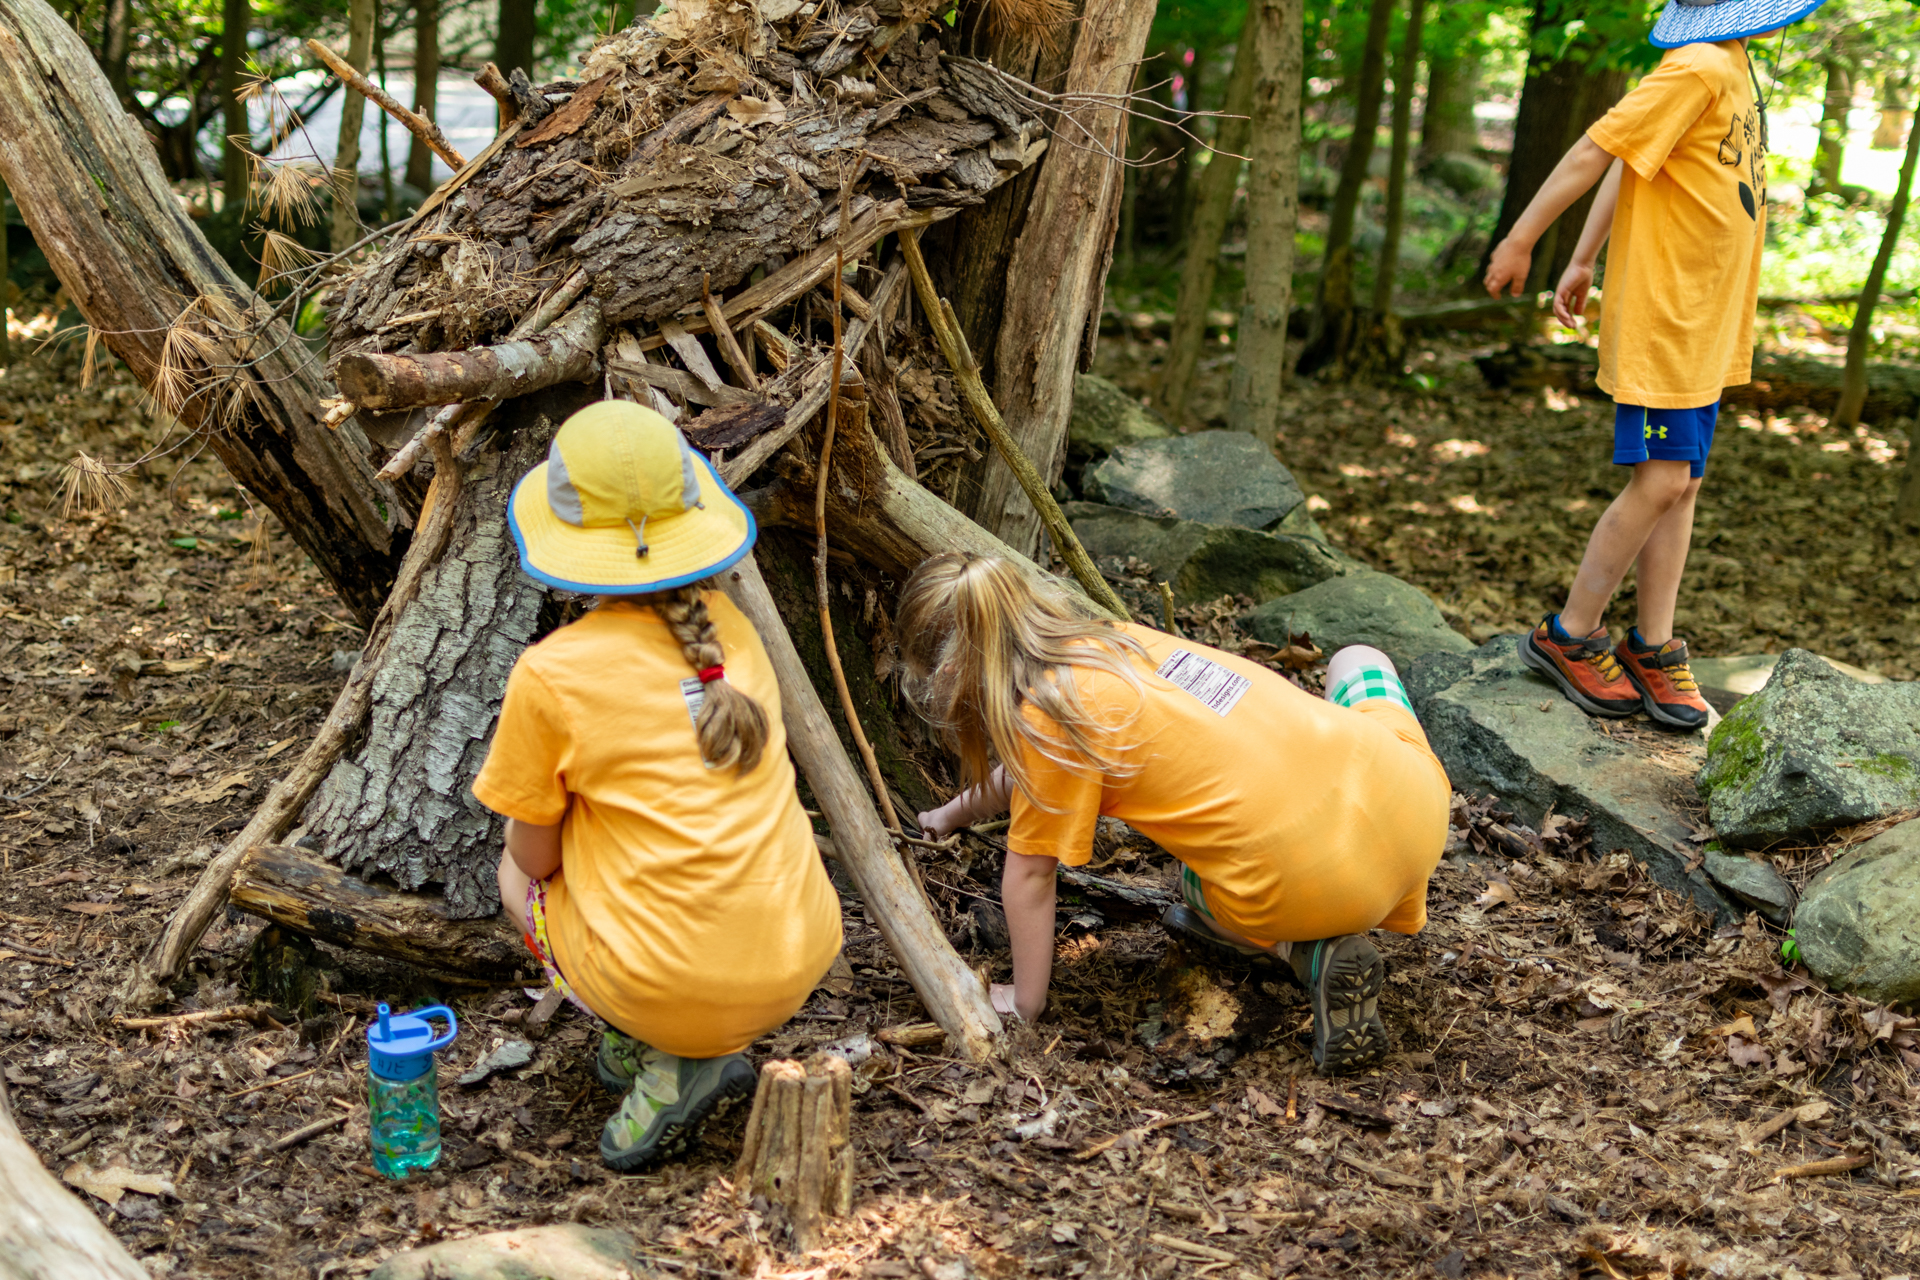 Habitat campers building a rustic shelter in the forest out of branches, bark, and sticks